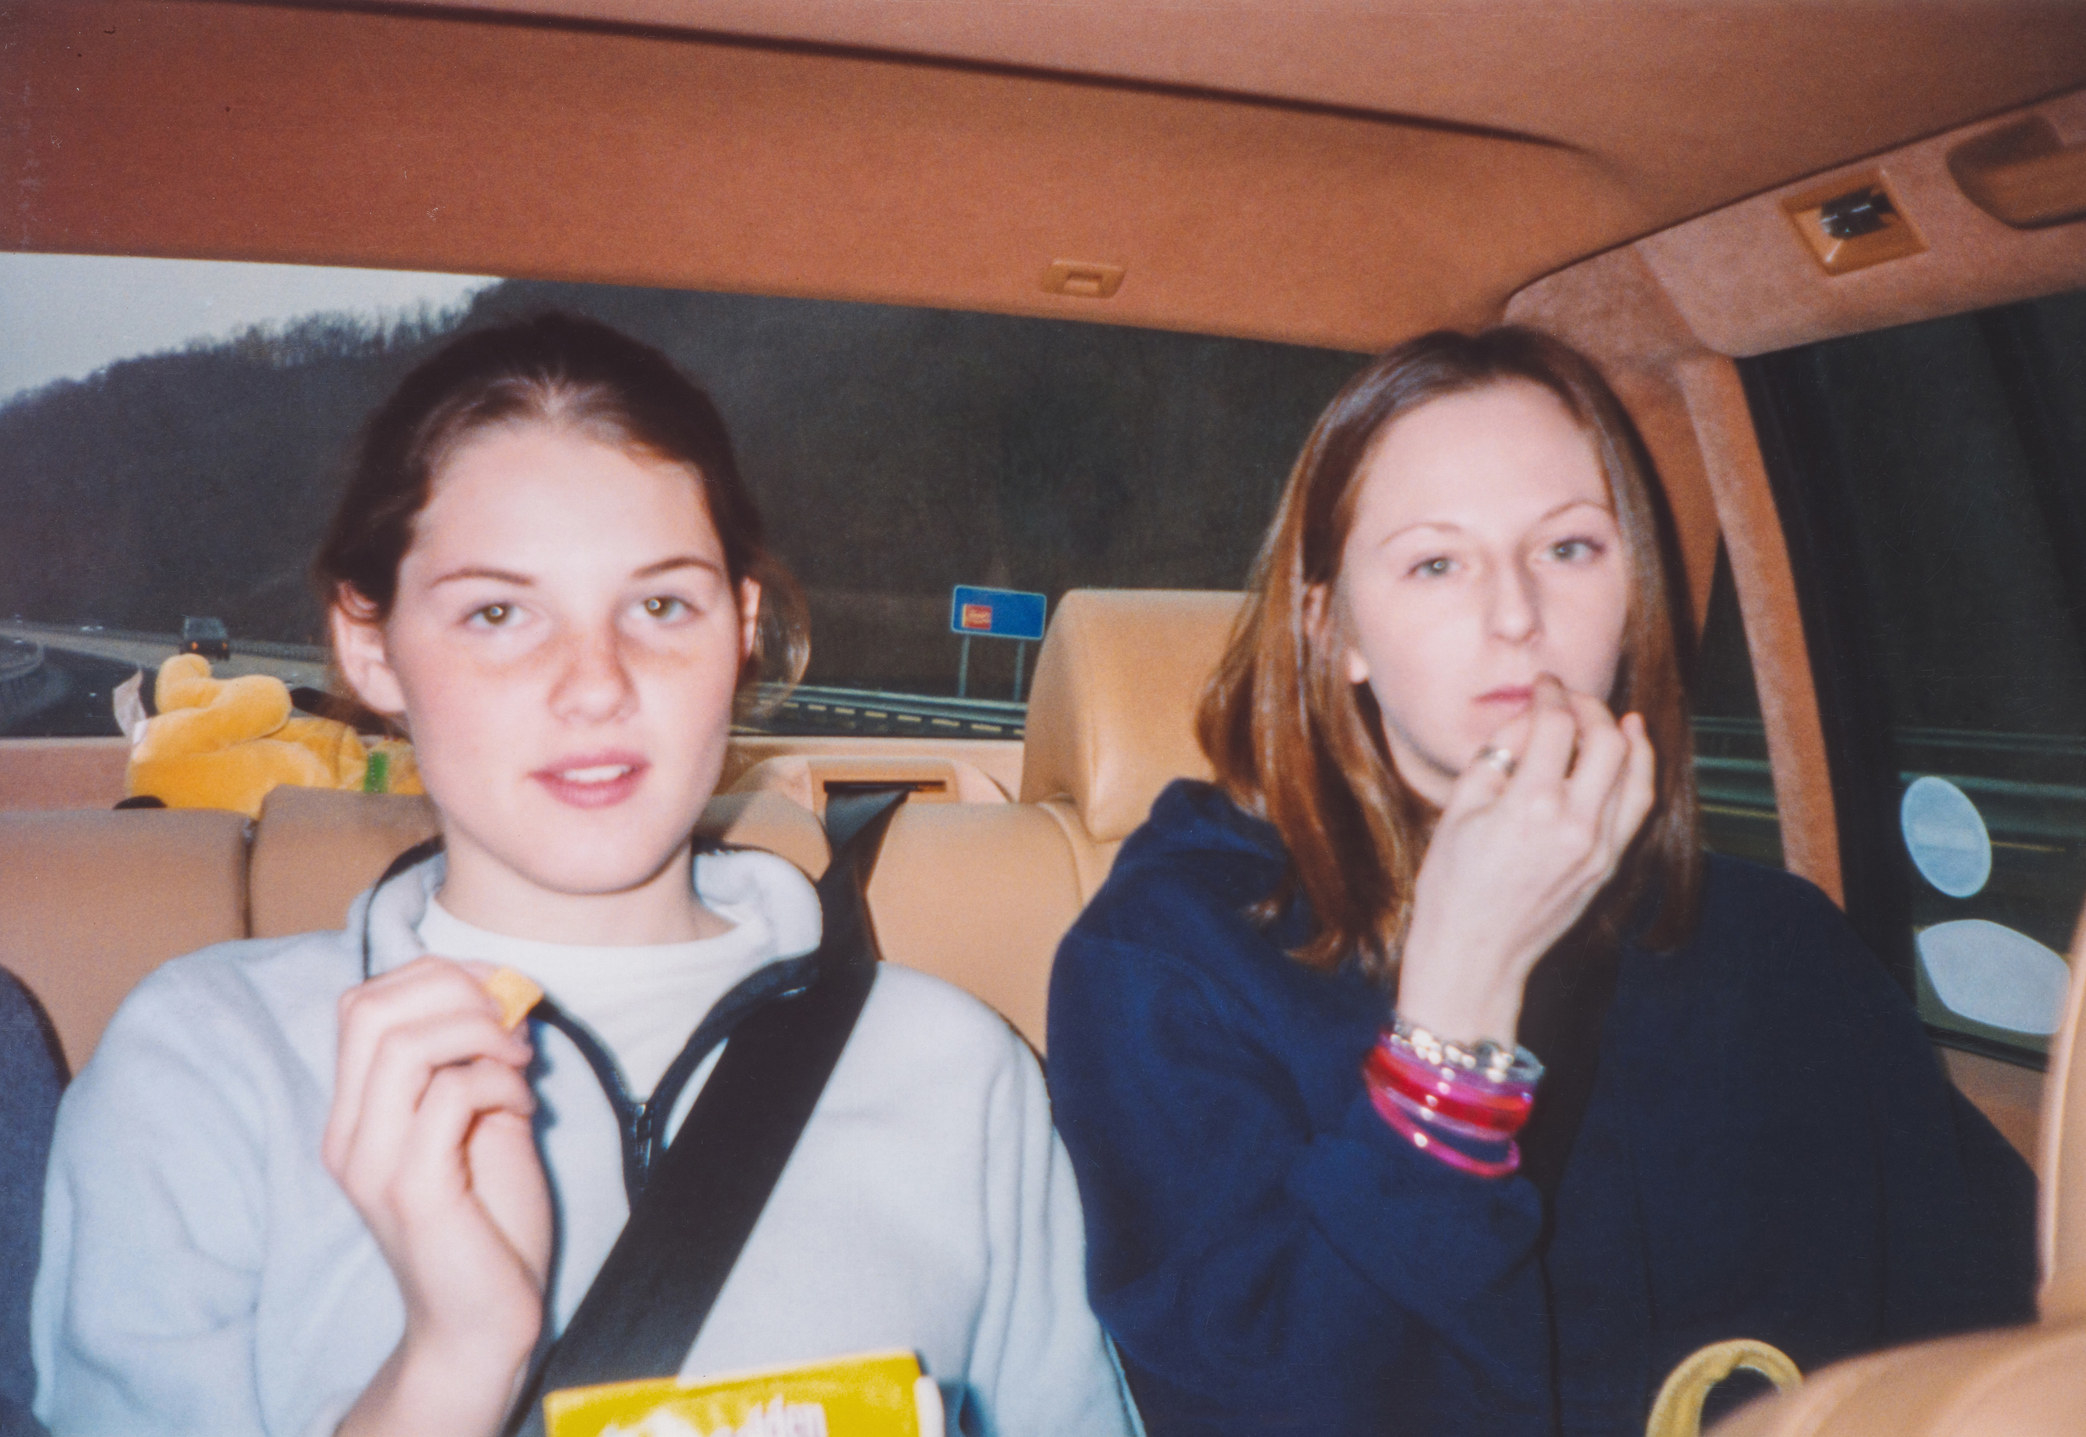 Two moody girls eating snacks in a car